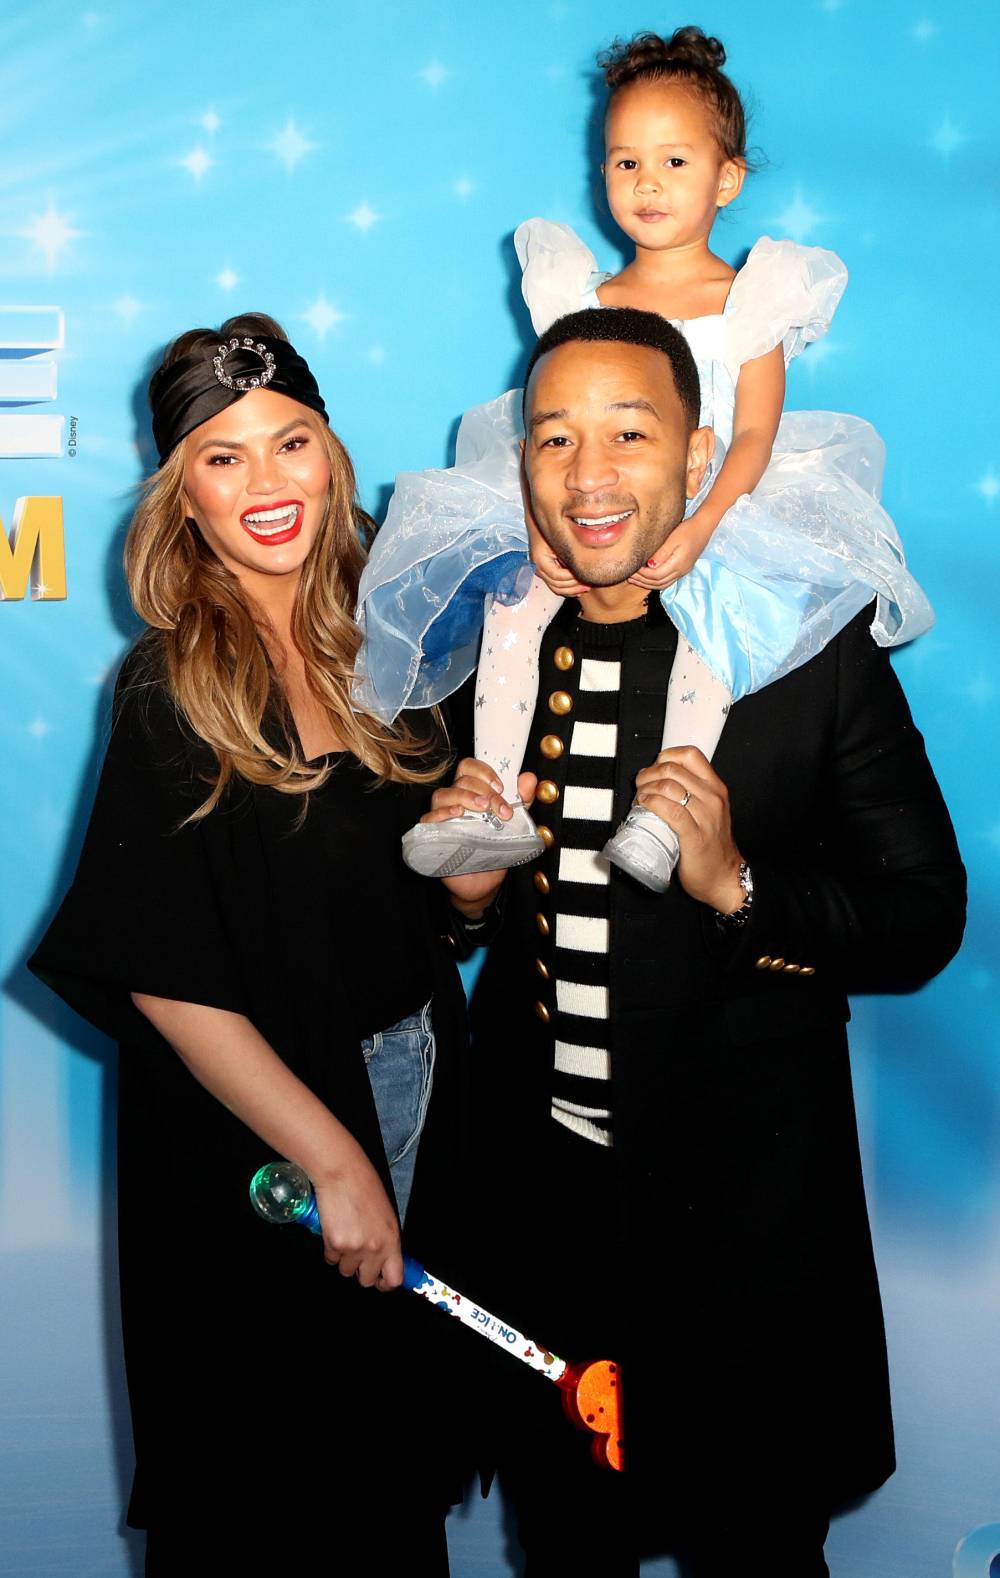 Chrissy Teigen Is Going to Make Luna’s ‘Disney Dreams Come True’ for Her Third Birthday